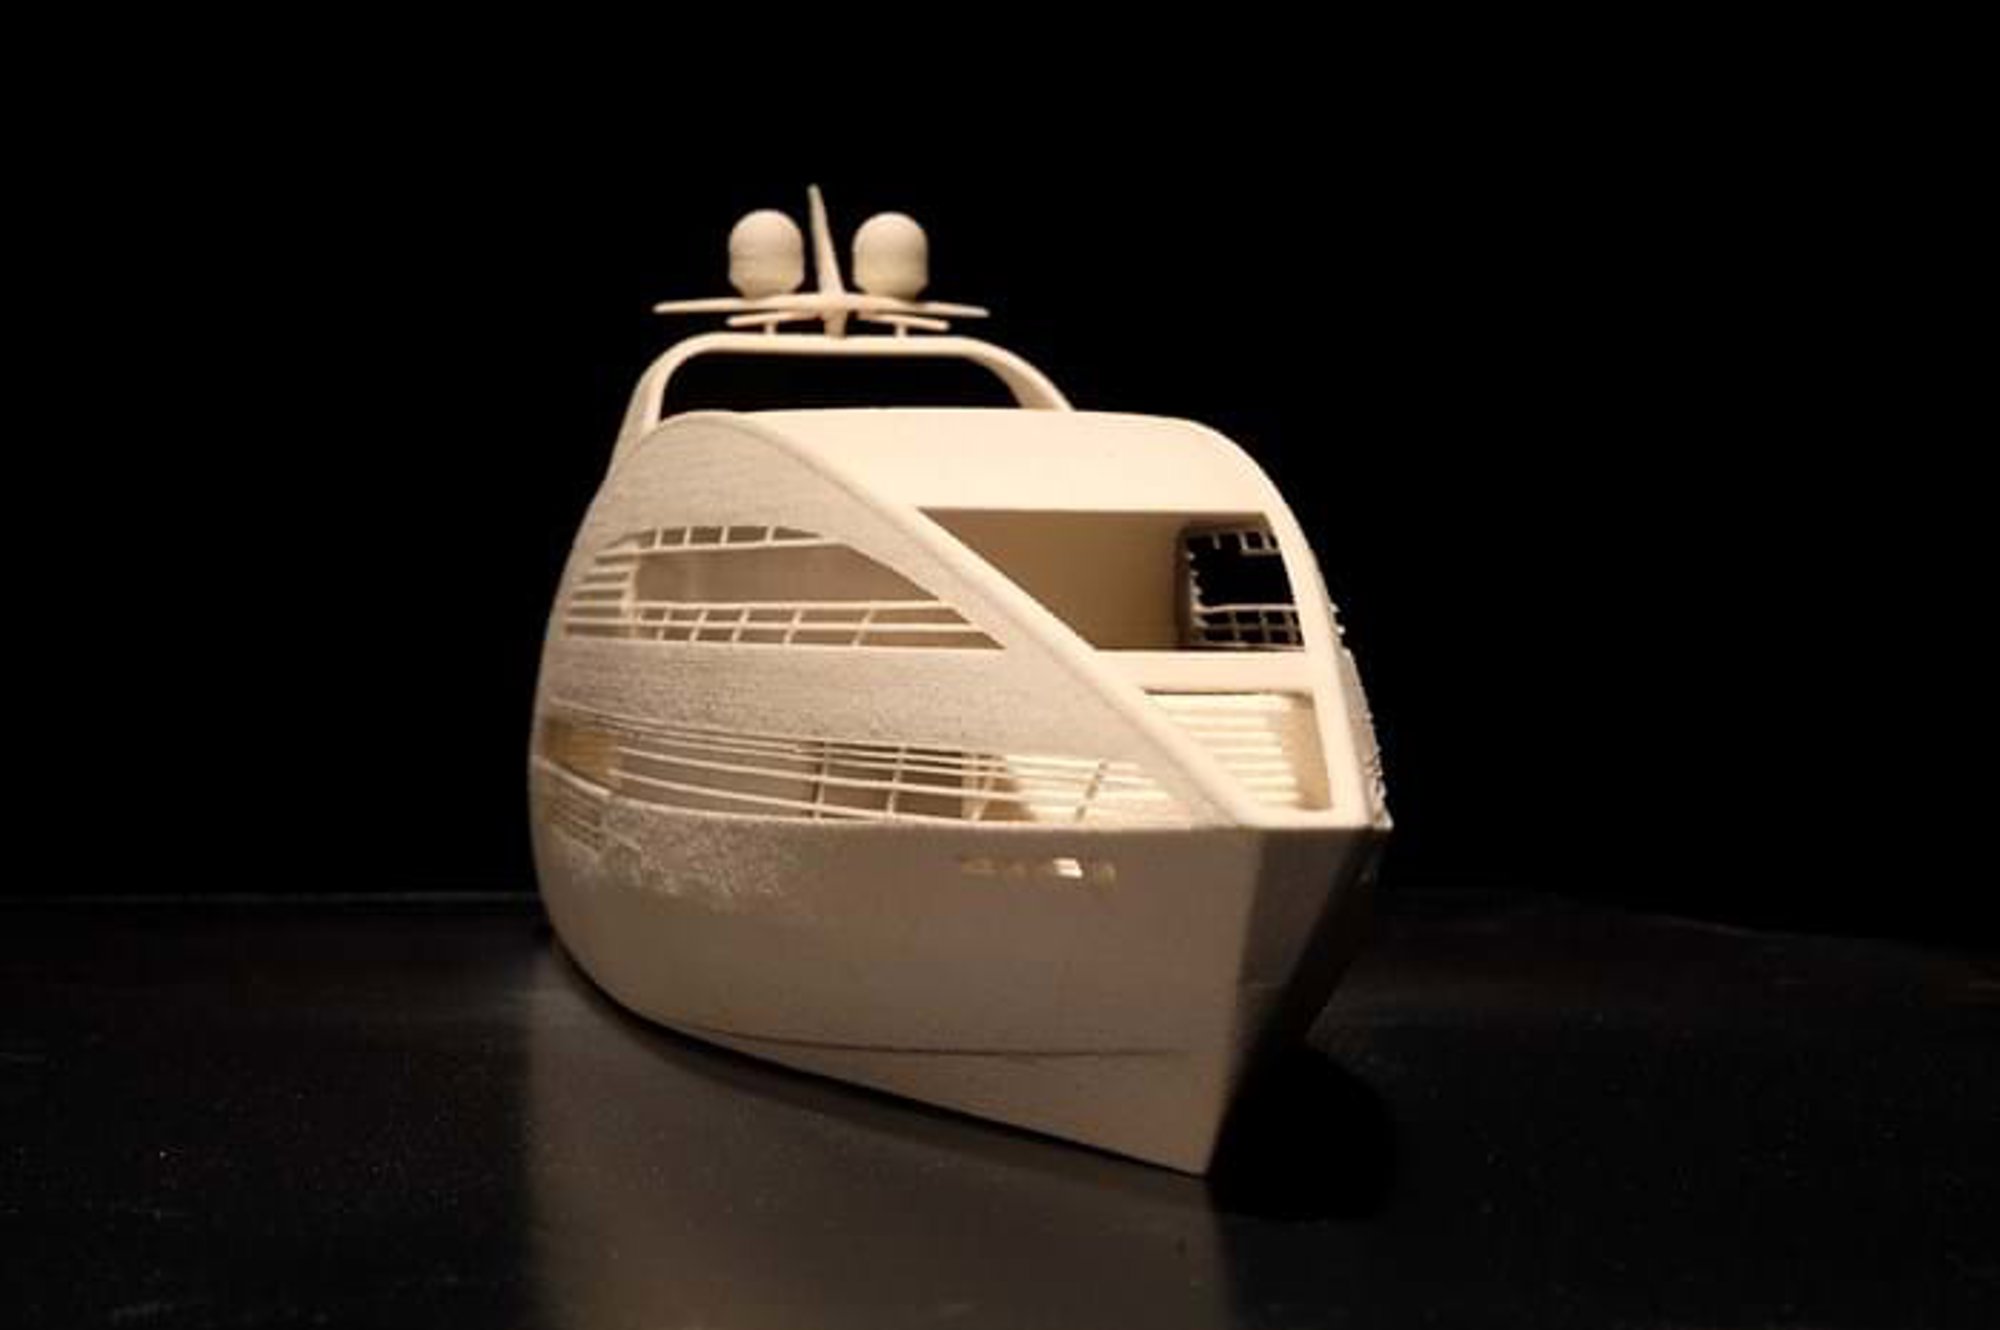 A model of the Yacht Plus boat, one of the first projects at Foster + Partners to take advantage of 3D-printing technology. © Foster + Partners